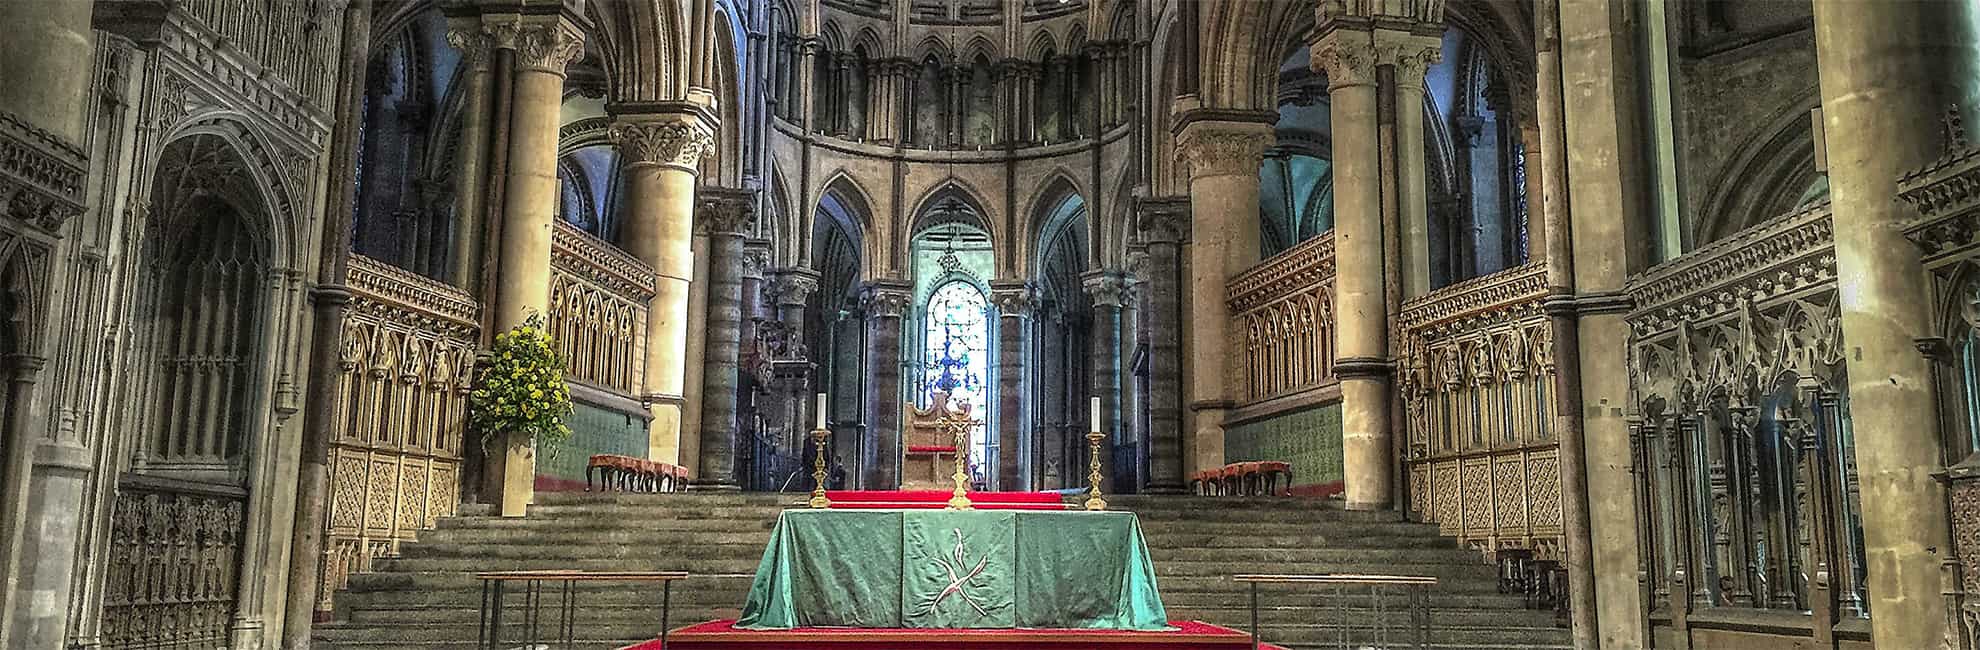 The altar inside Canterbury Cathedral 